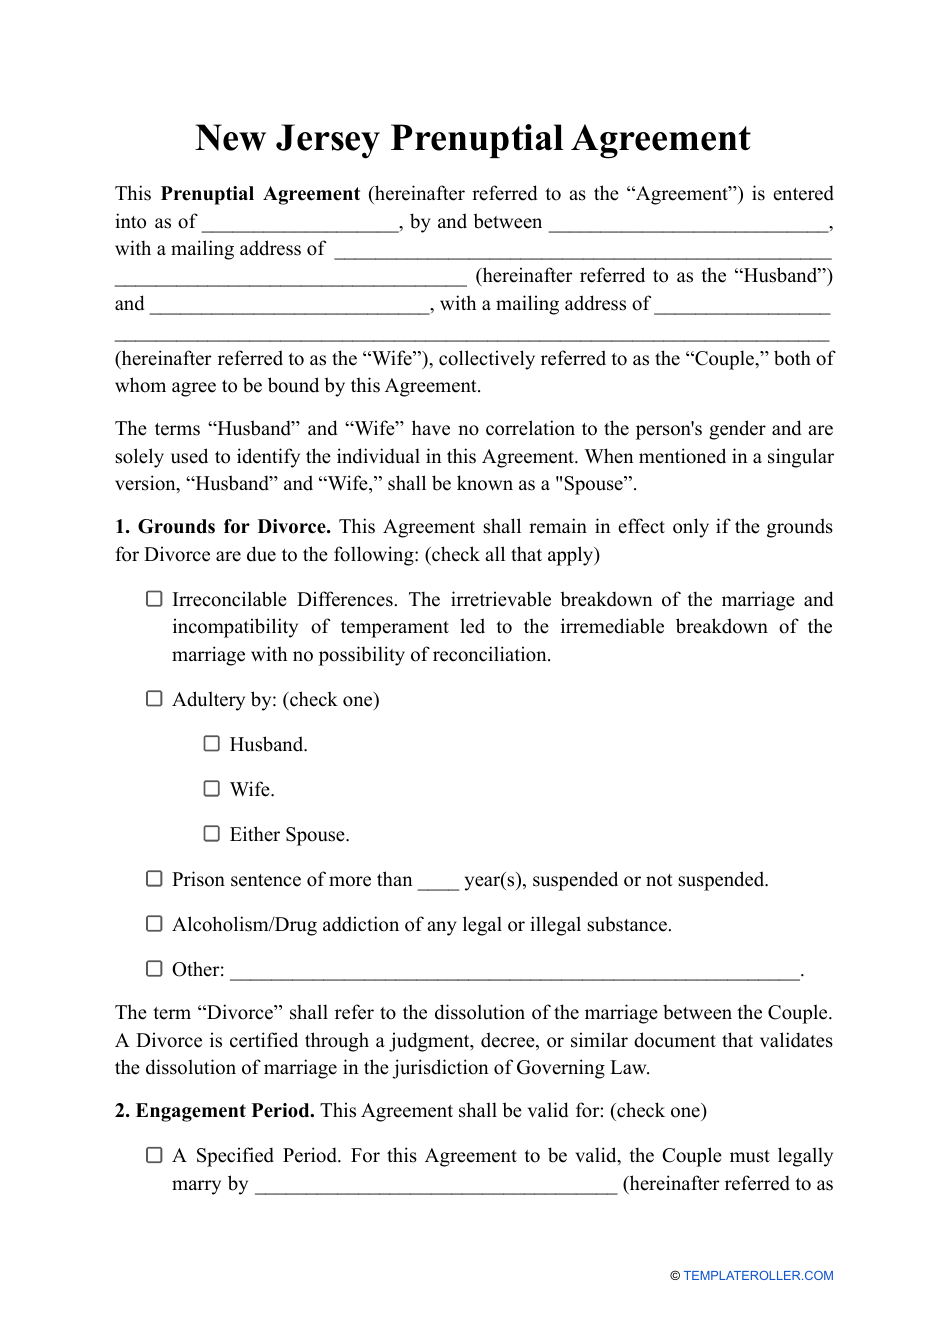 Prenuptial Agreement Template - New Jersey, Page 1